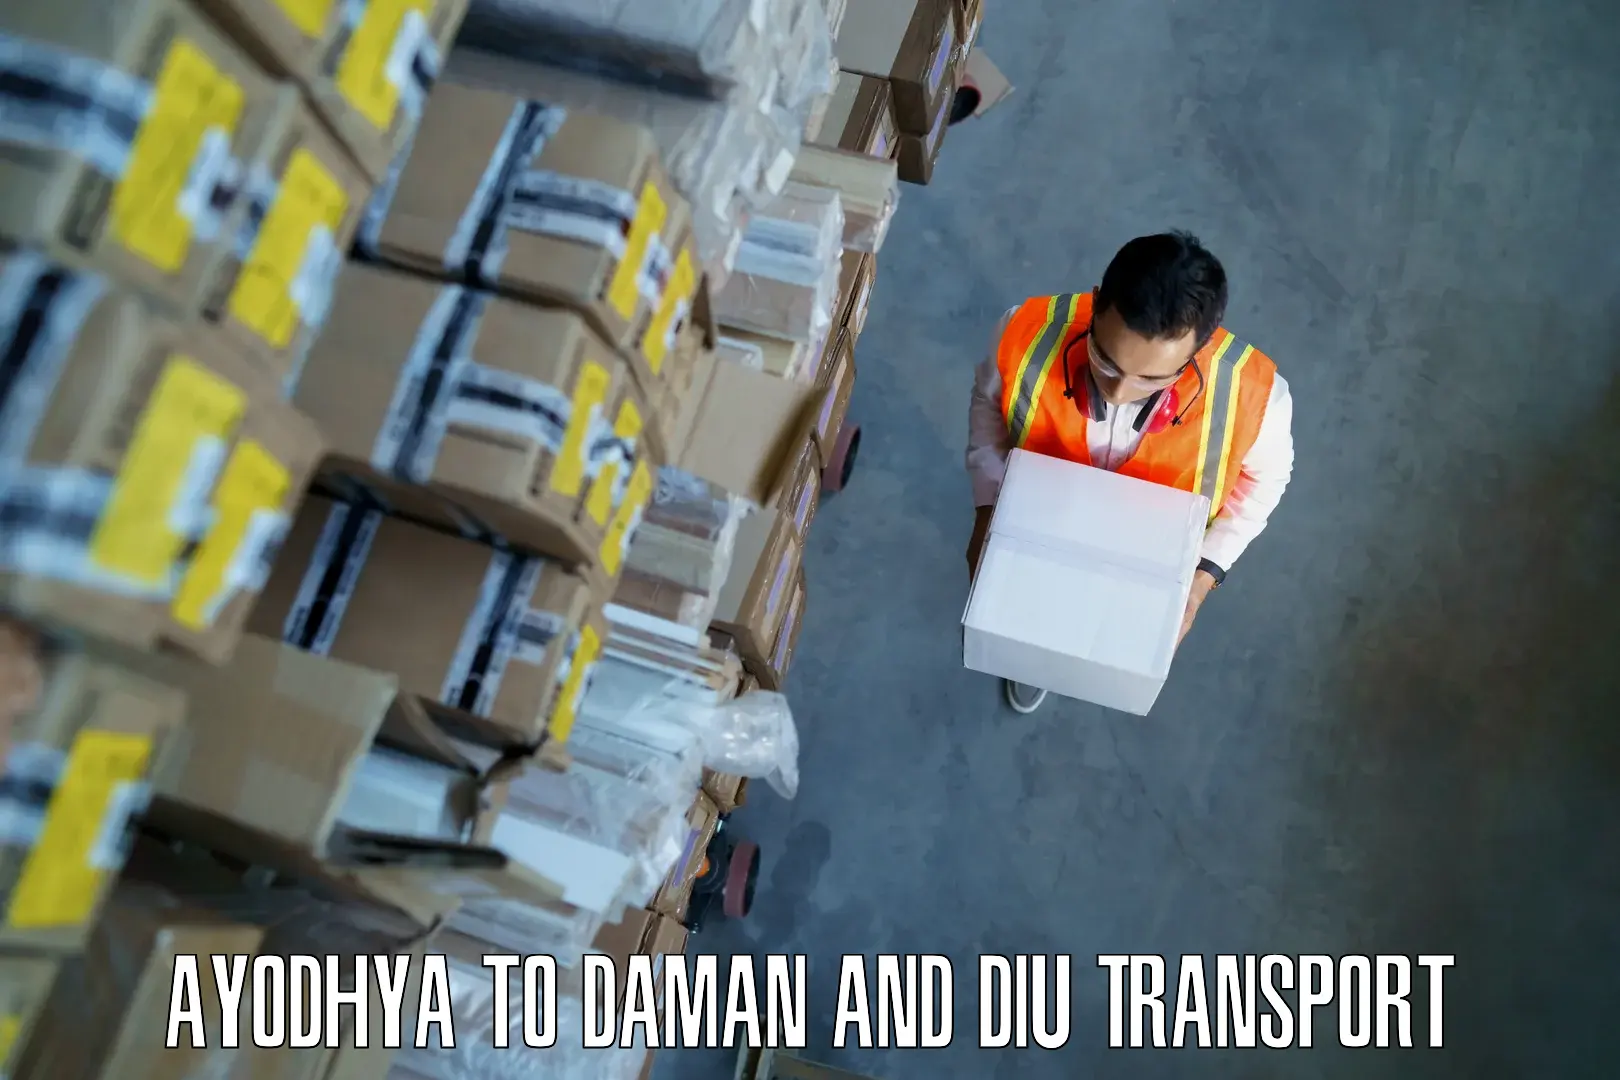 Daily transport service Ayodhya to Daman and Diu